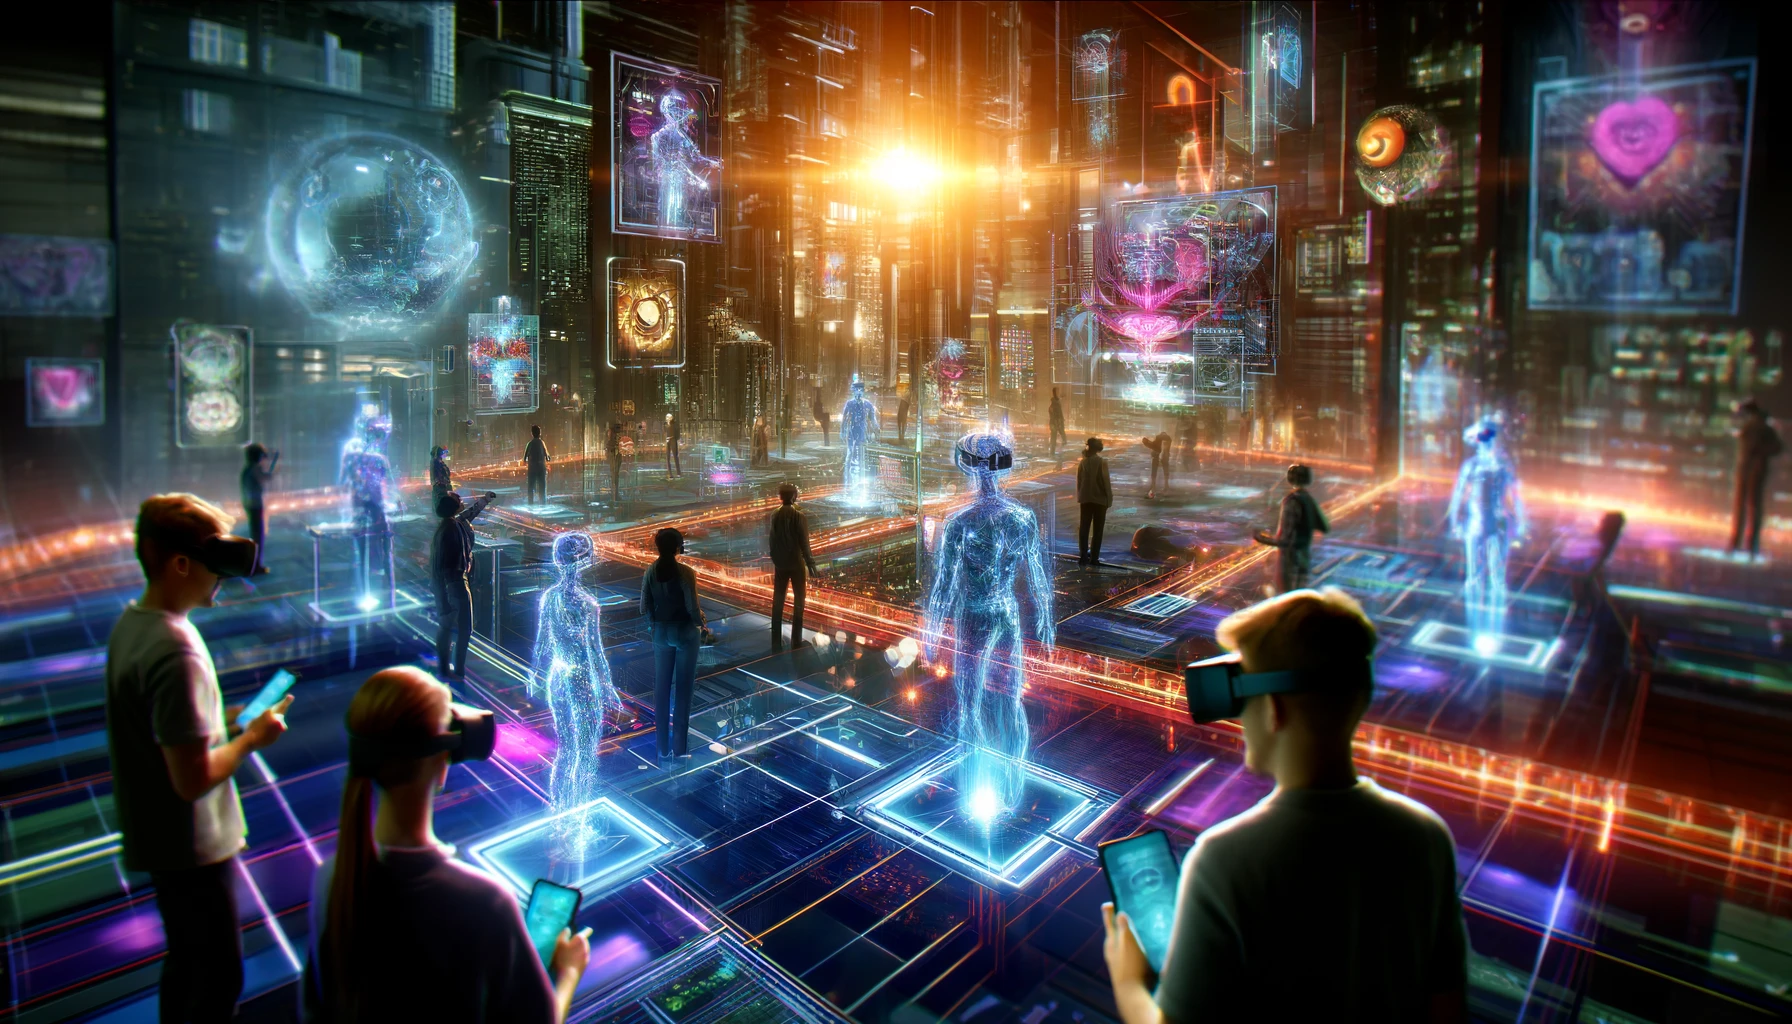 The Future is Here: Augmented and Virtual Reality Experiences on Social Media